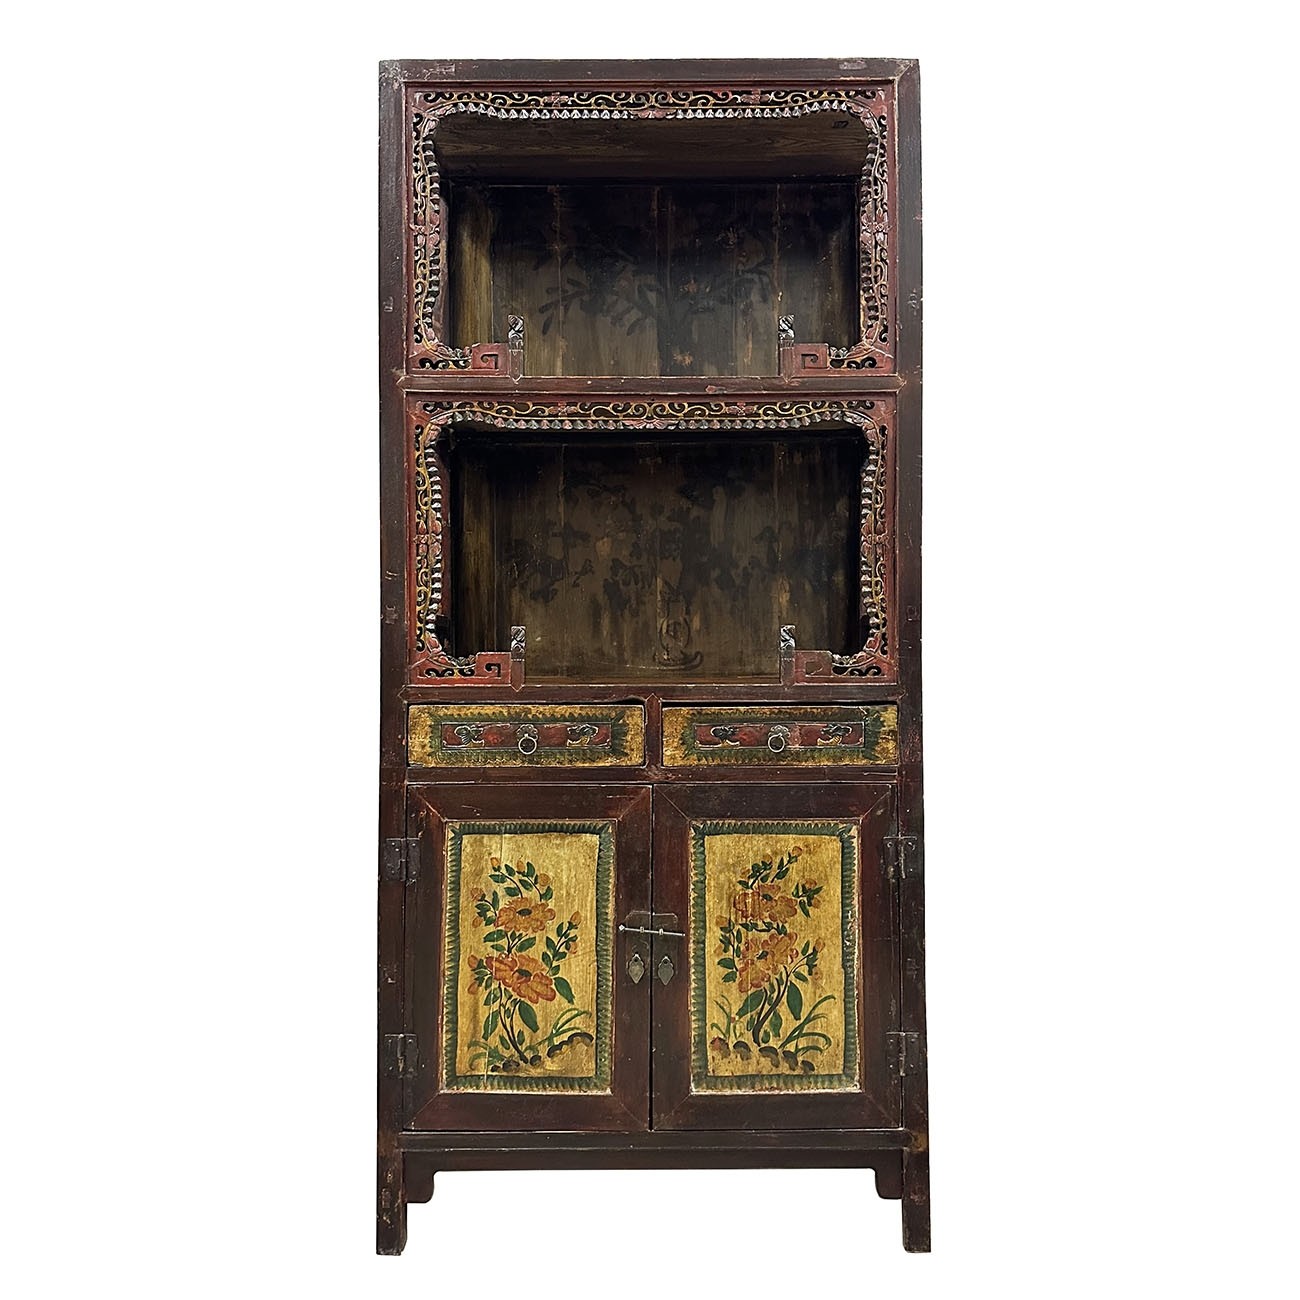 Late 19th Century Antique Chinese Carved Display Cabinet